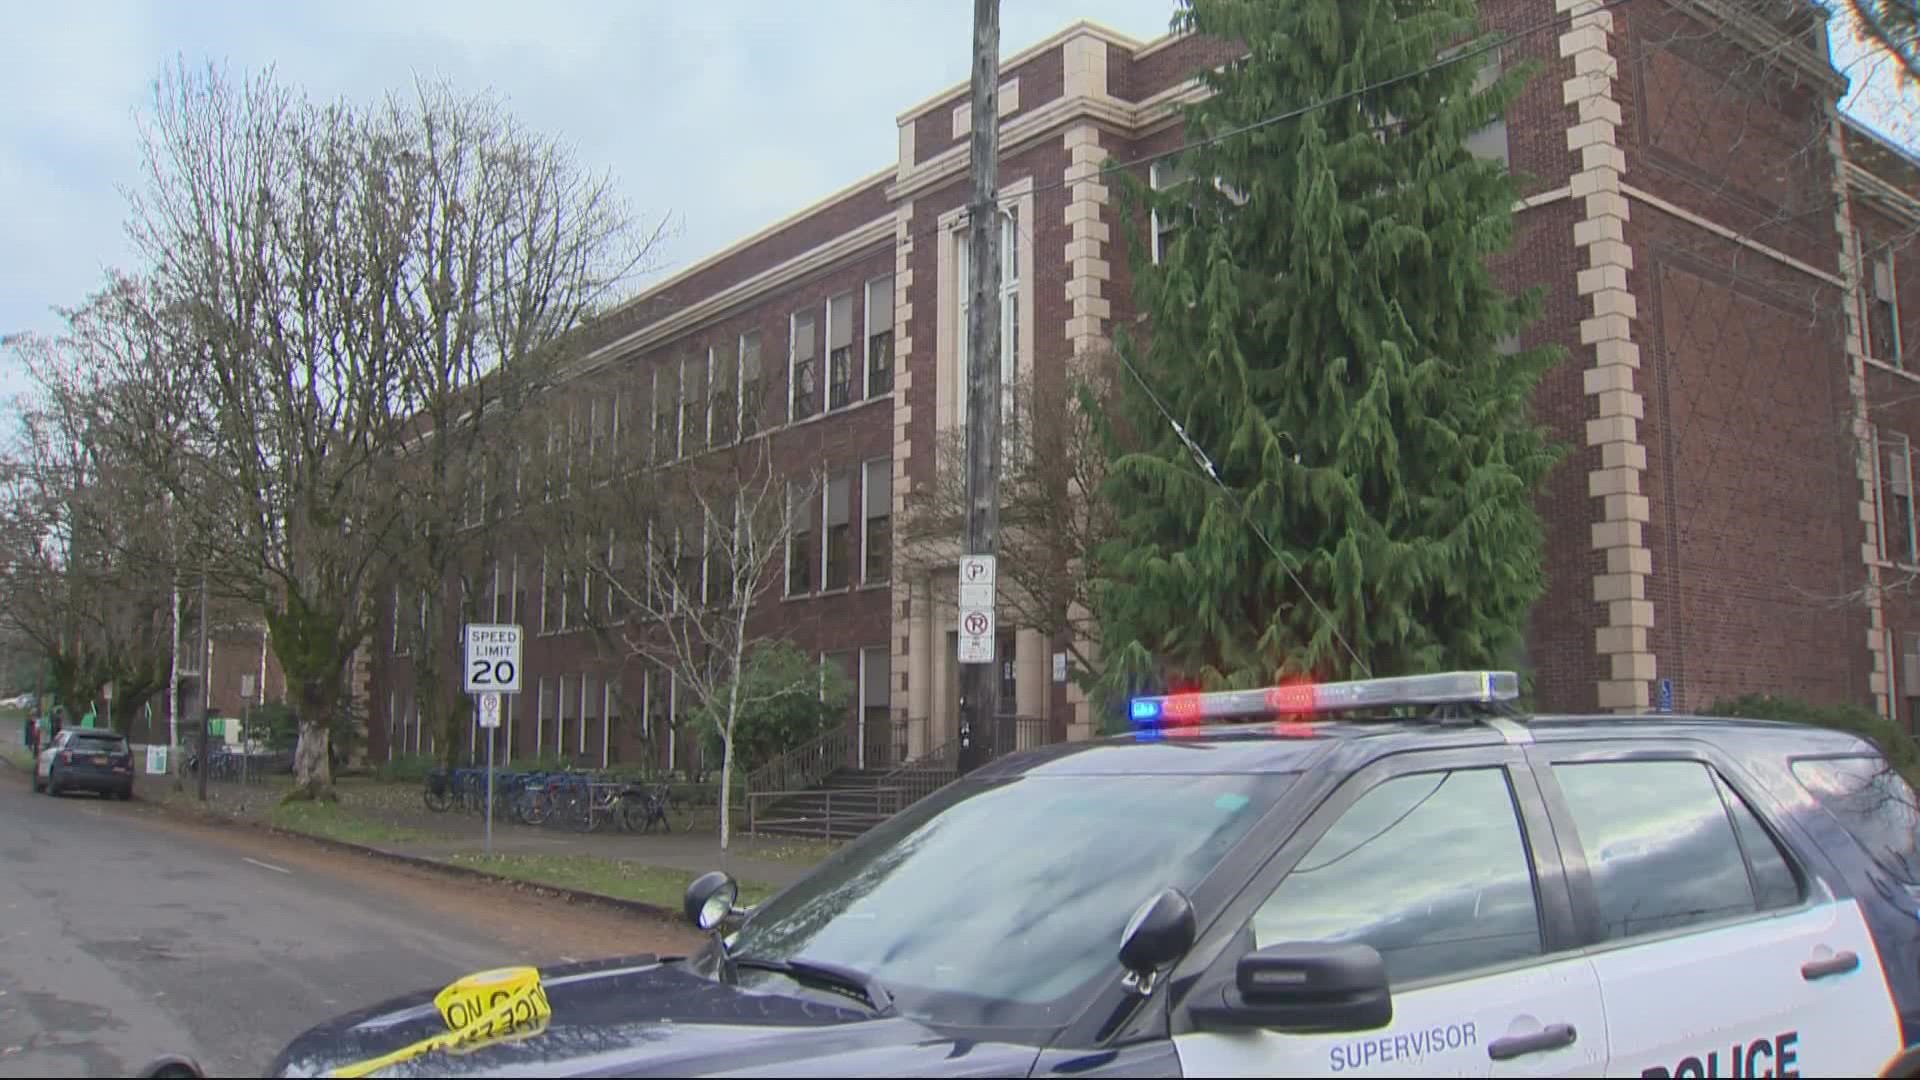 Portland Public Schools administrators and leaders from the city and county have scheduled a summit for Friday morning on school safety.